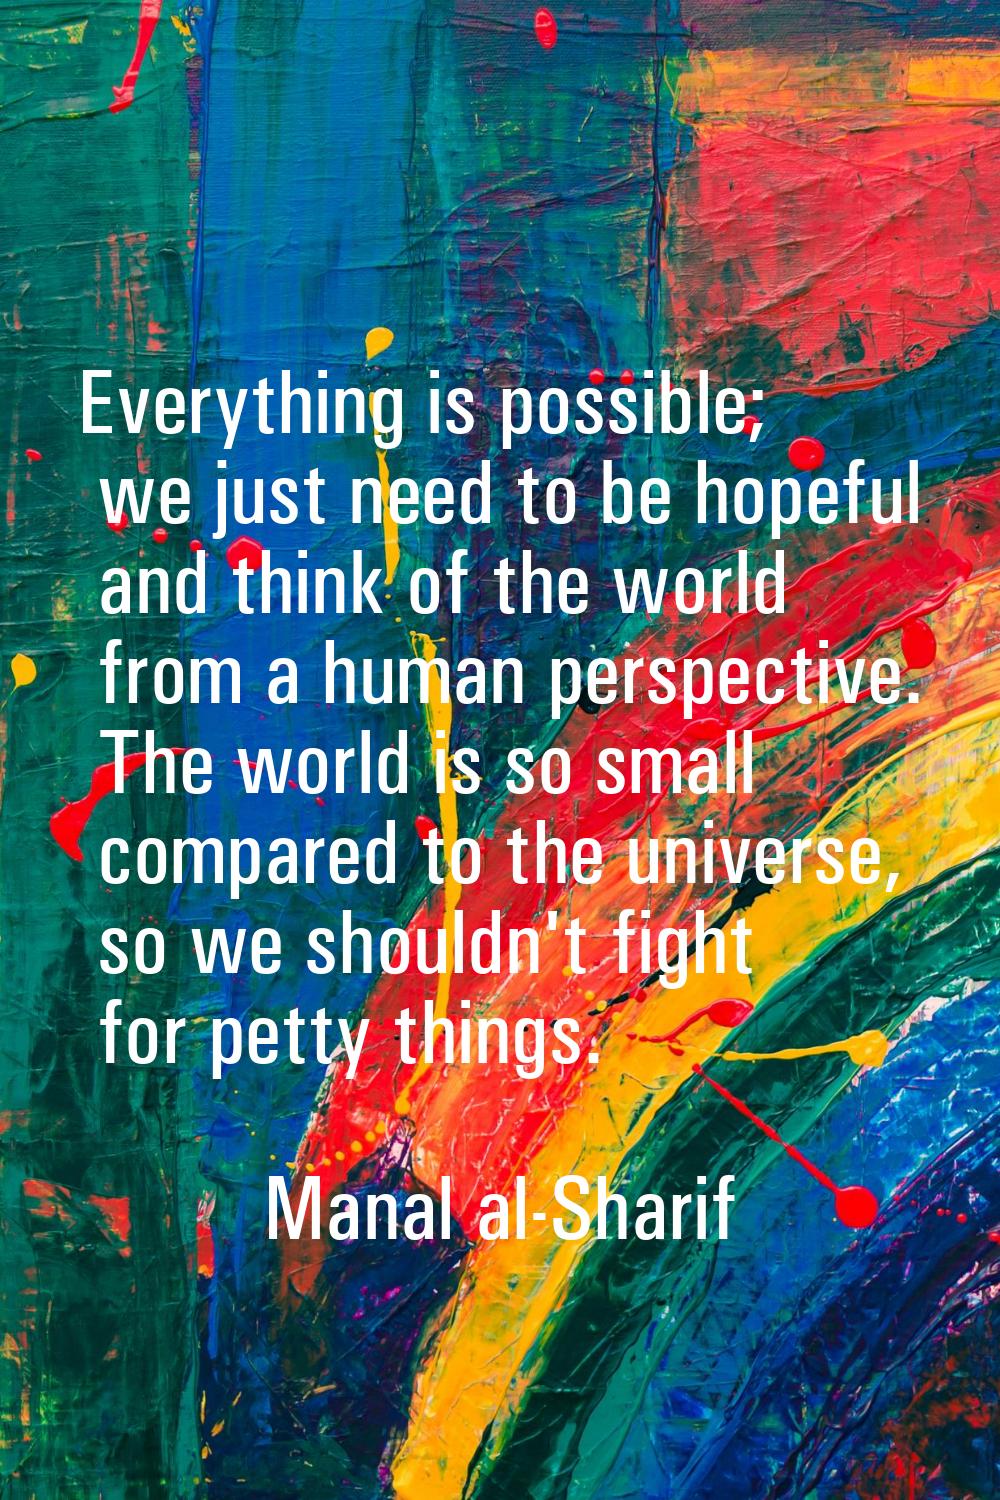 Everything is possible; we just need to be hopeful and think of the world from a human perspective.